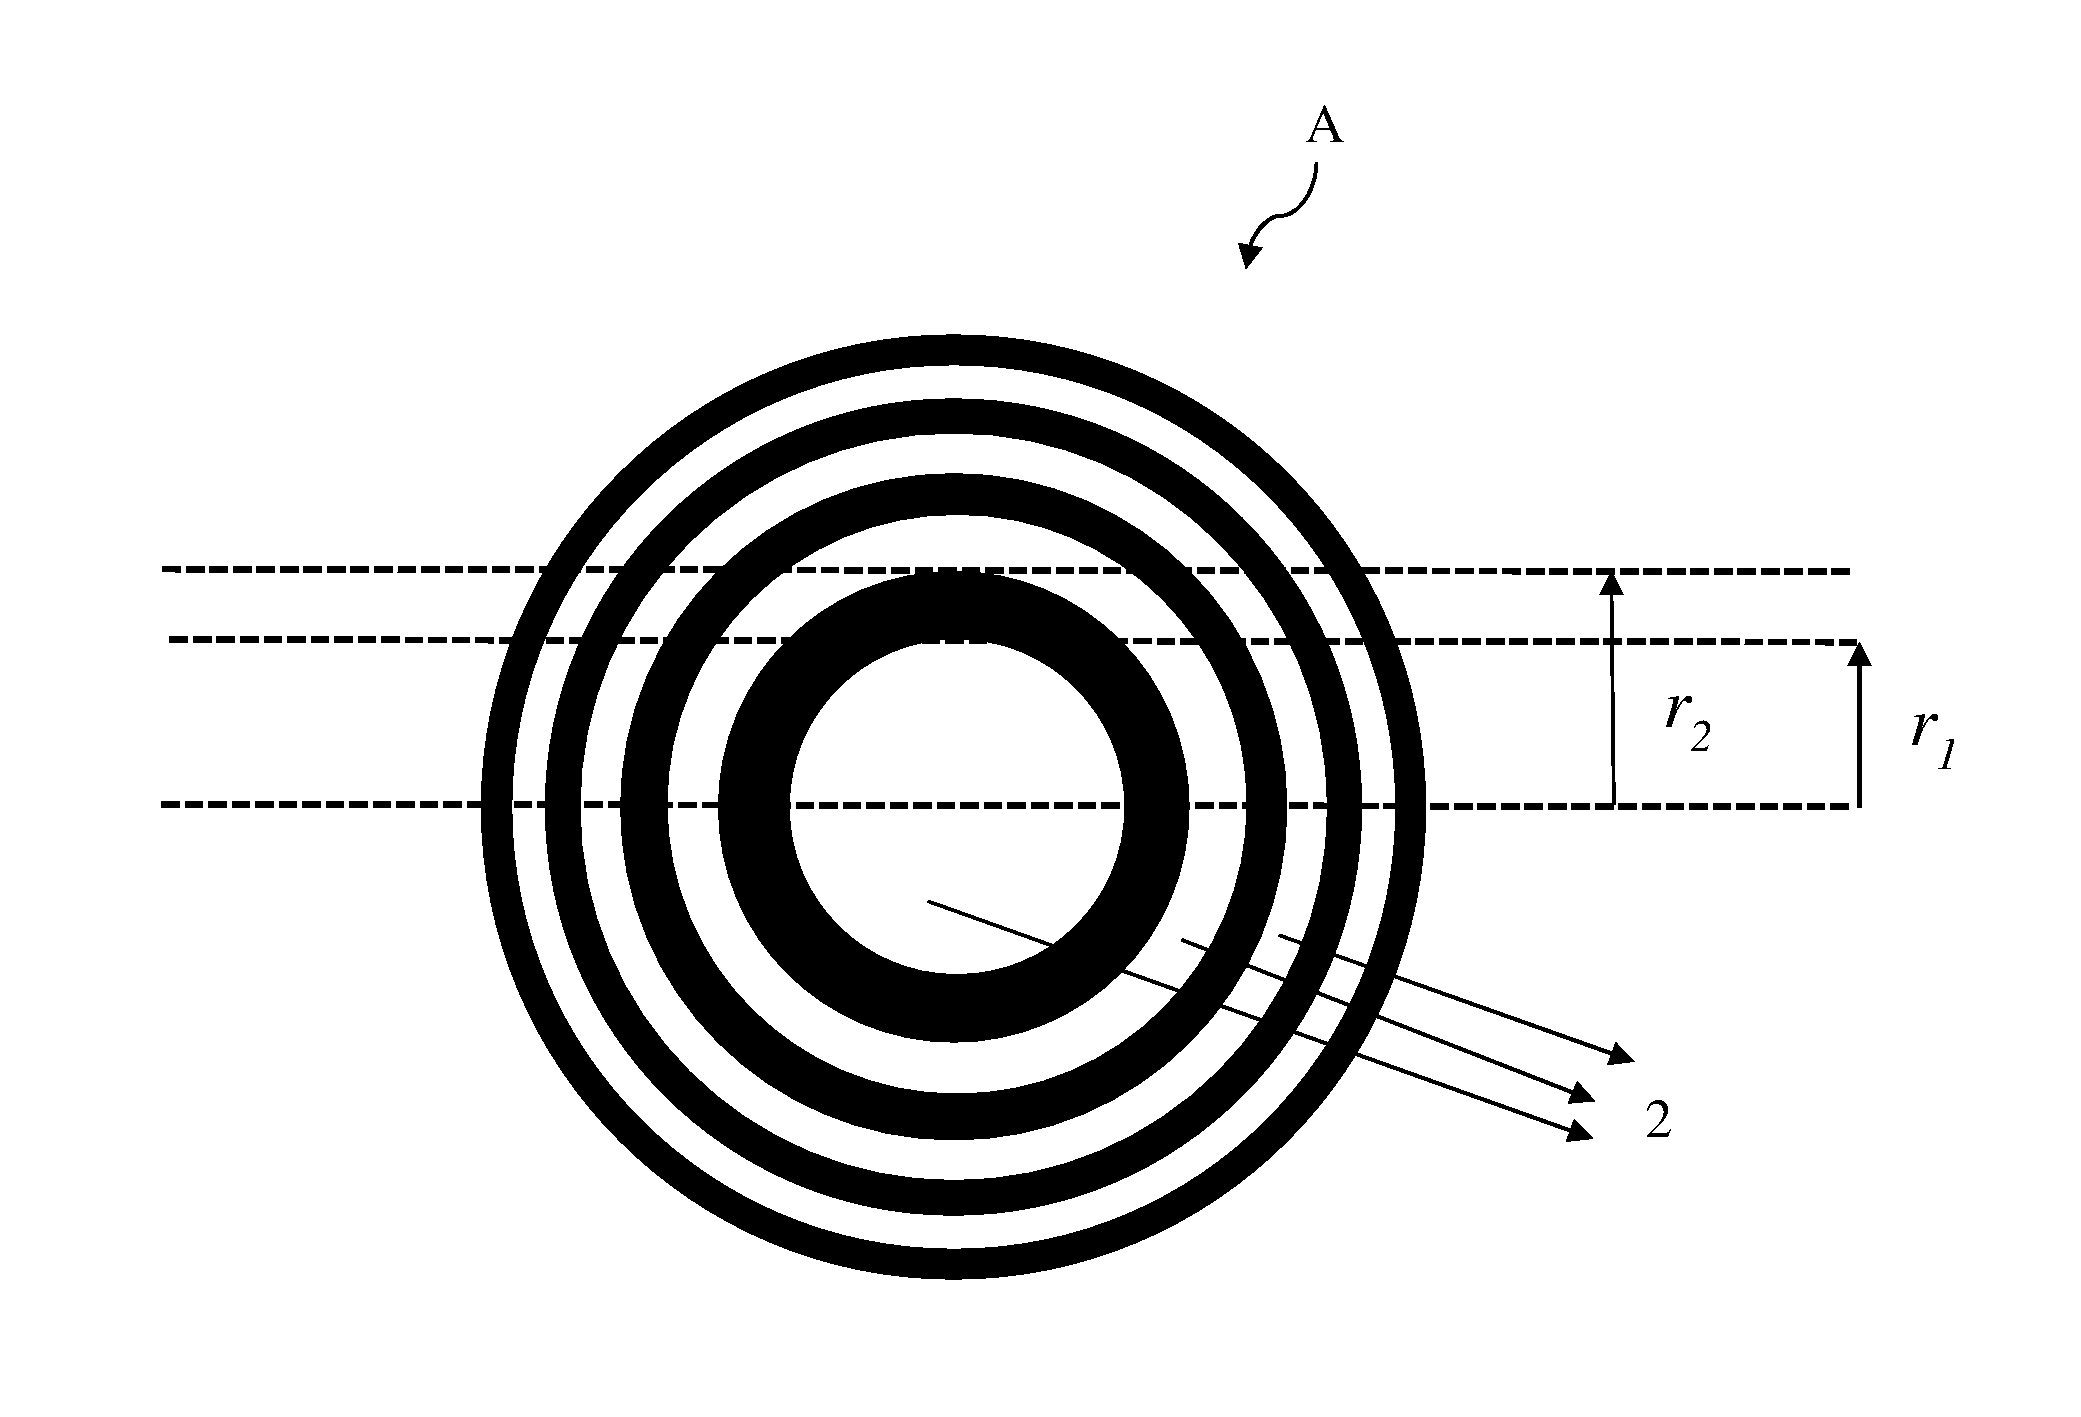 System for increasing the number of focal points in artificial eye lenses